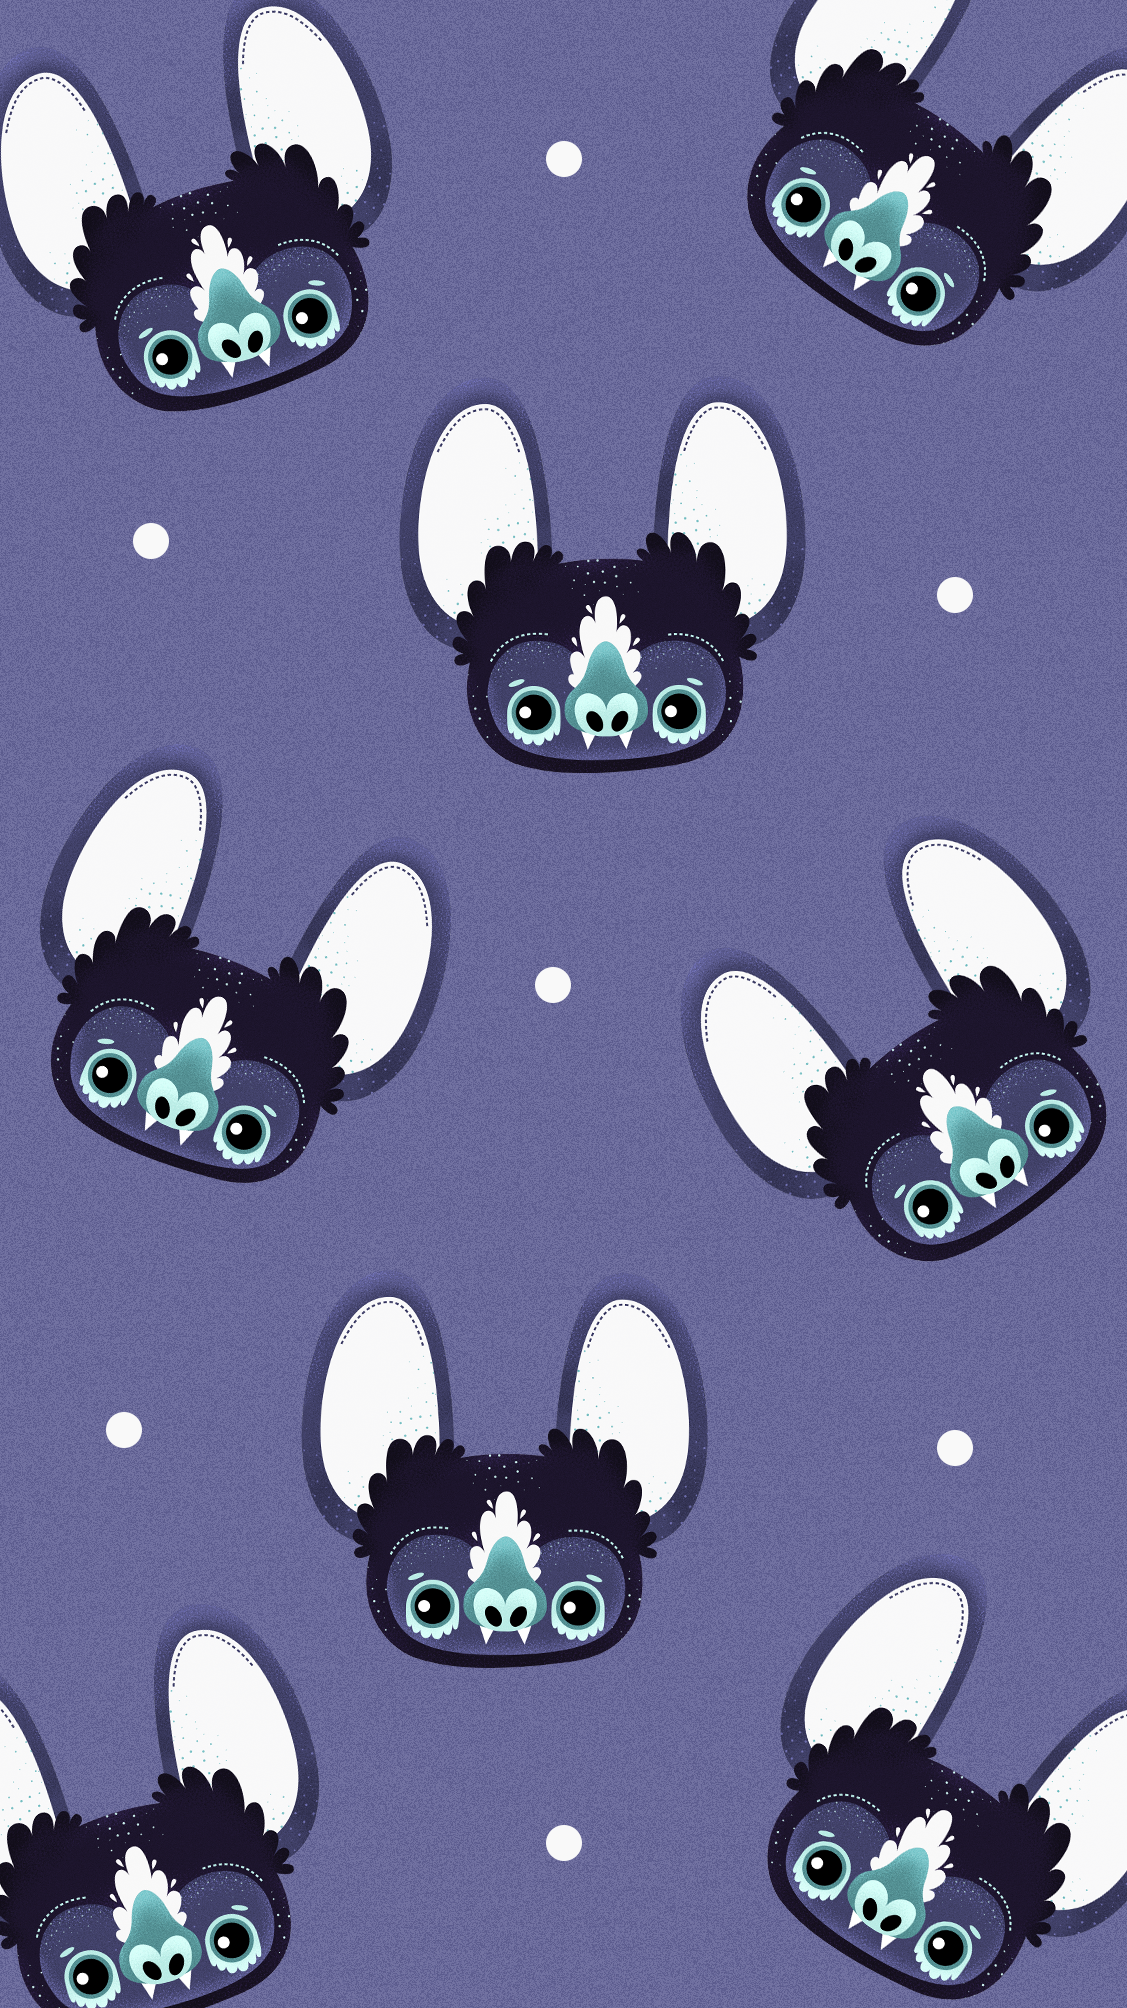 Bats Fabric Wallpaper and Home Decor  Spoonflower